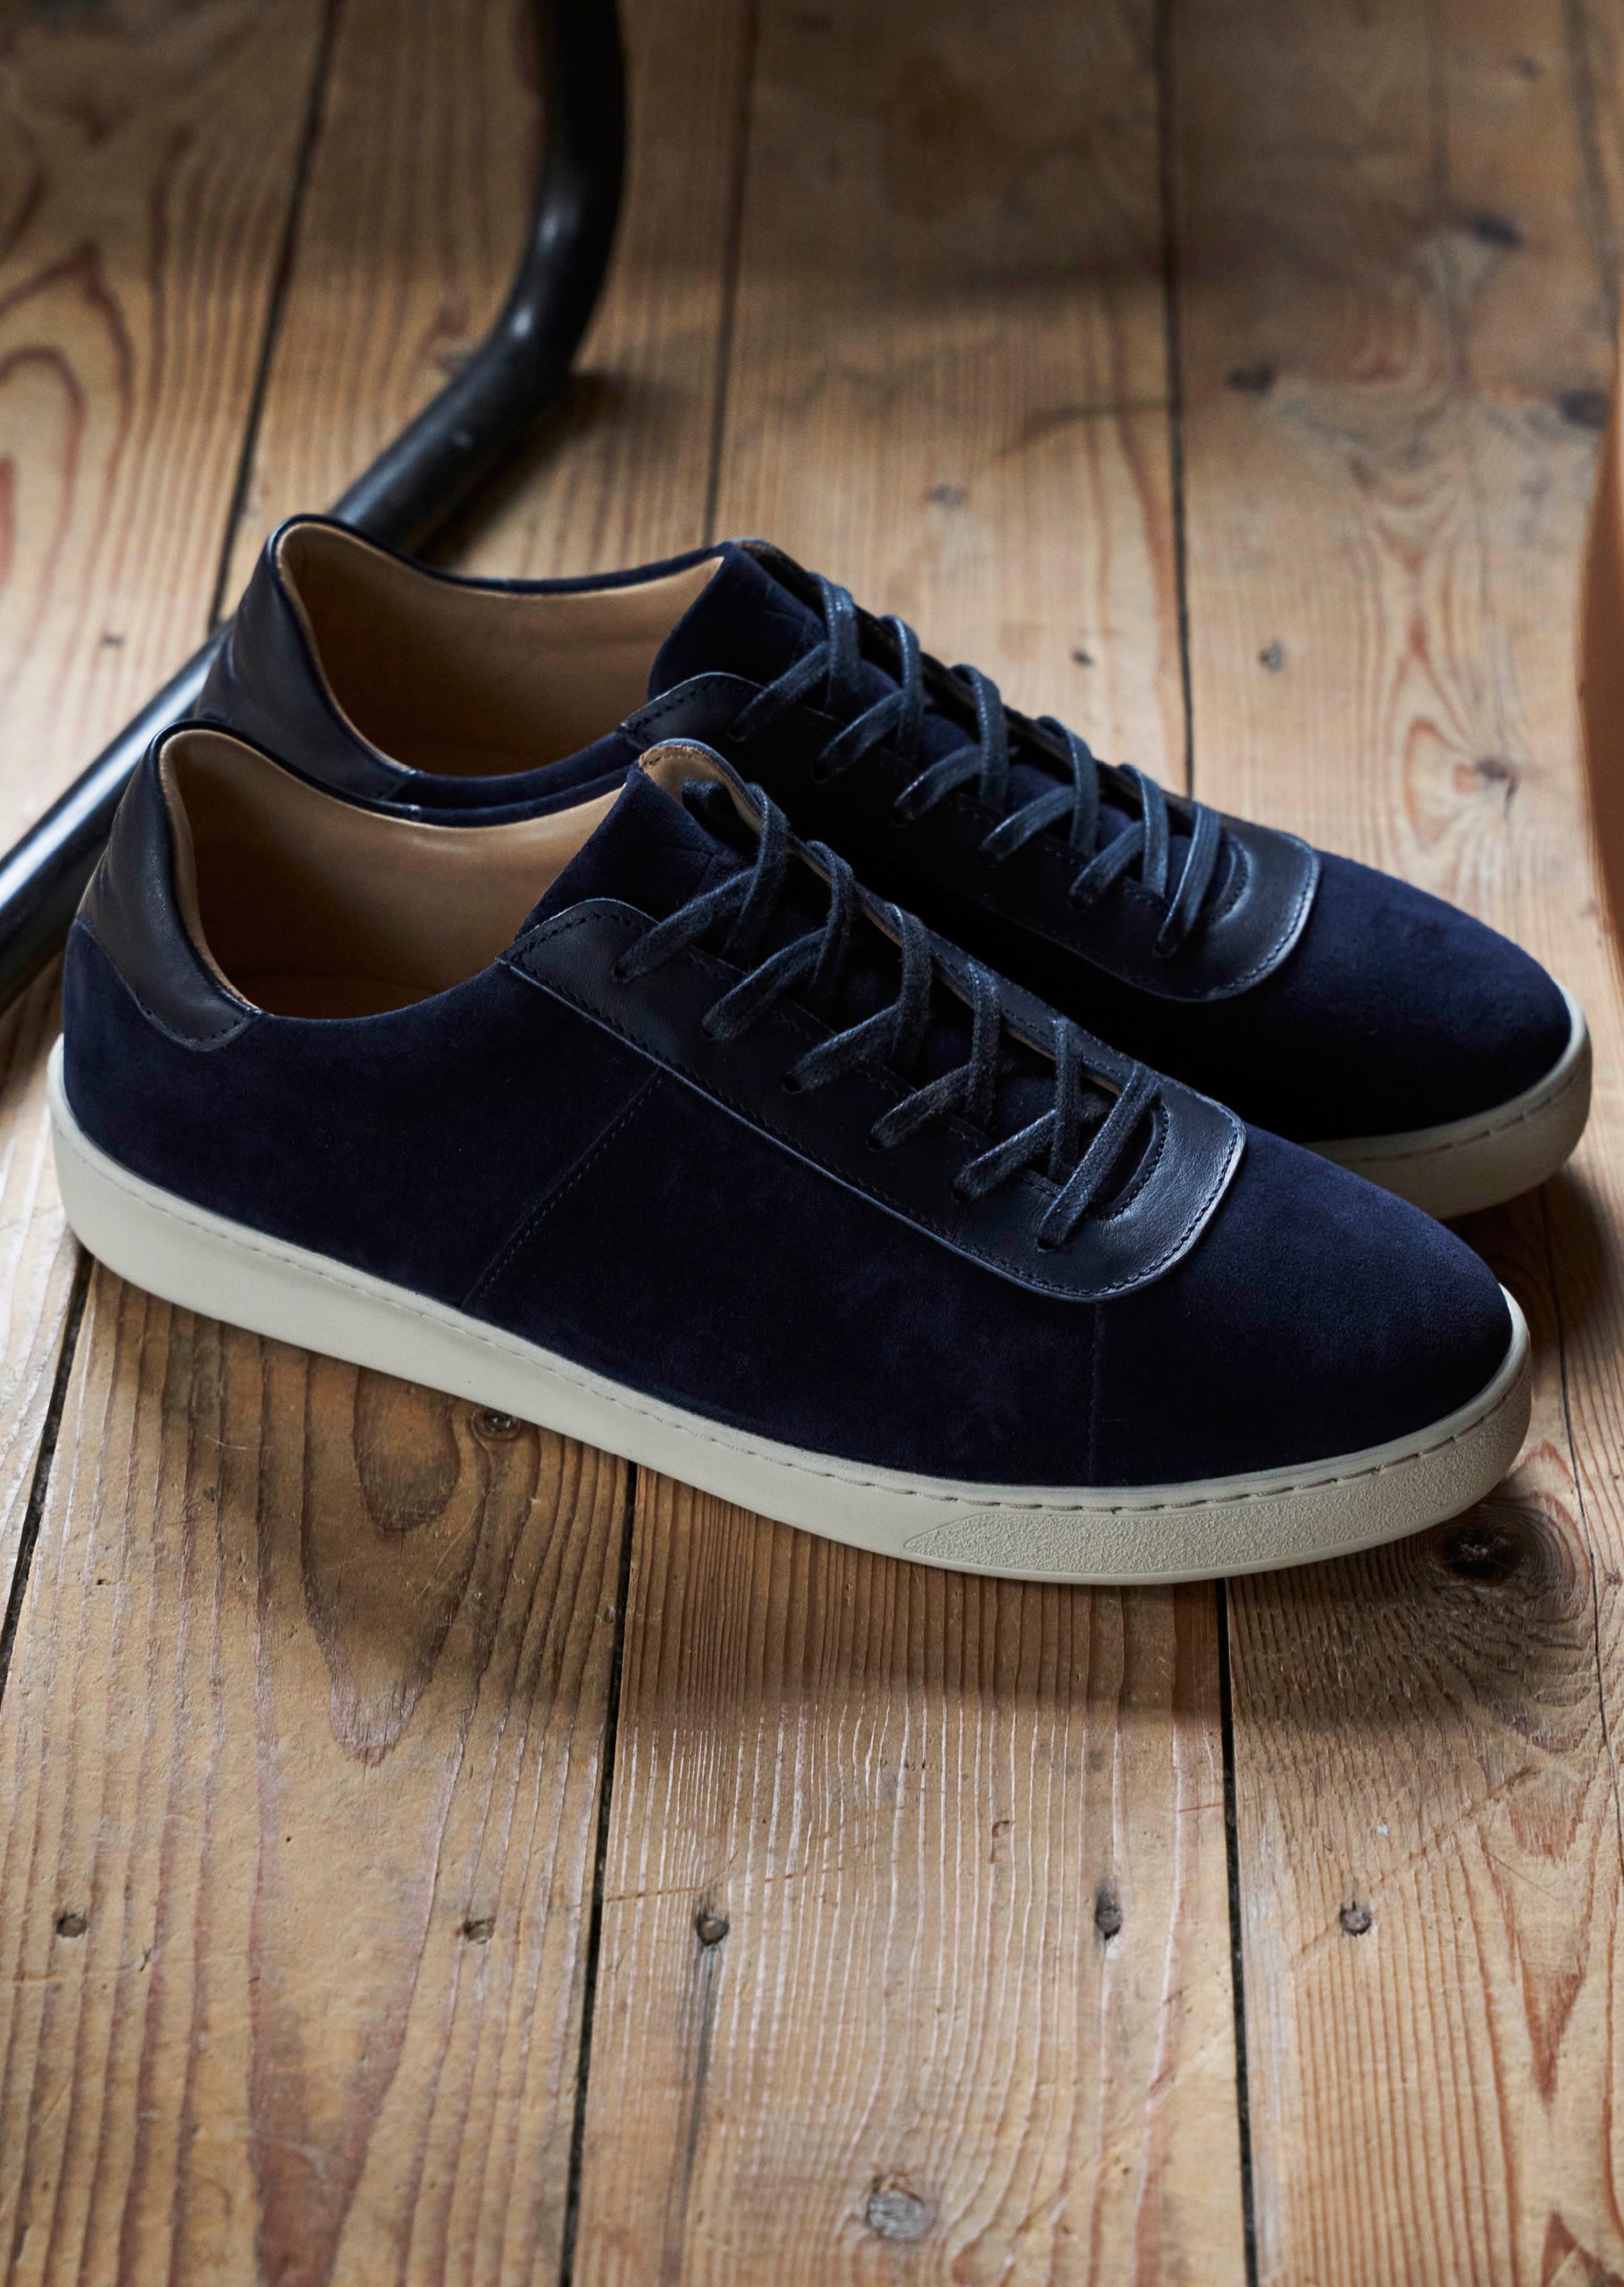 Men's blue suede leather low Sneakers